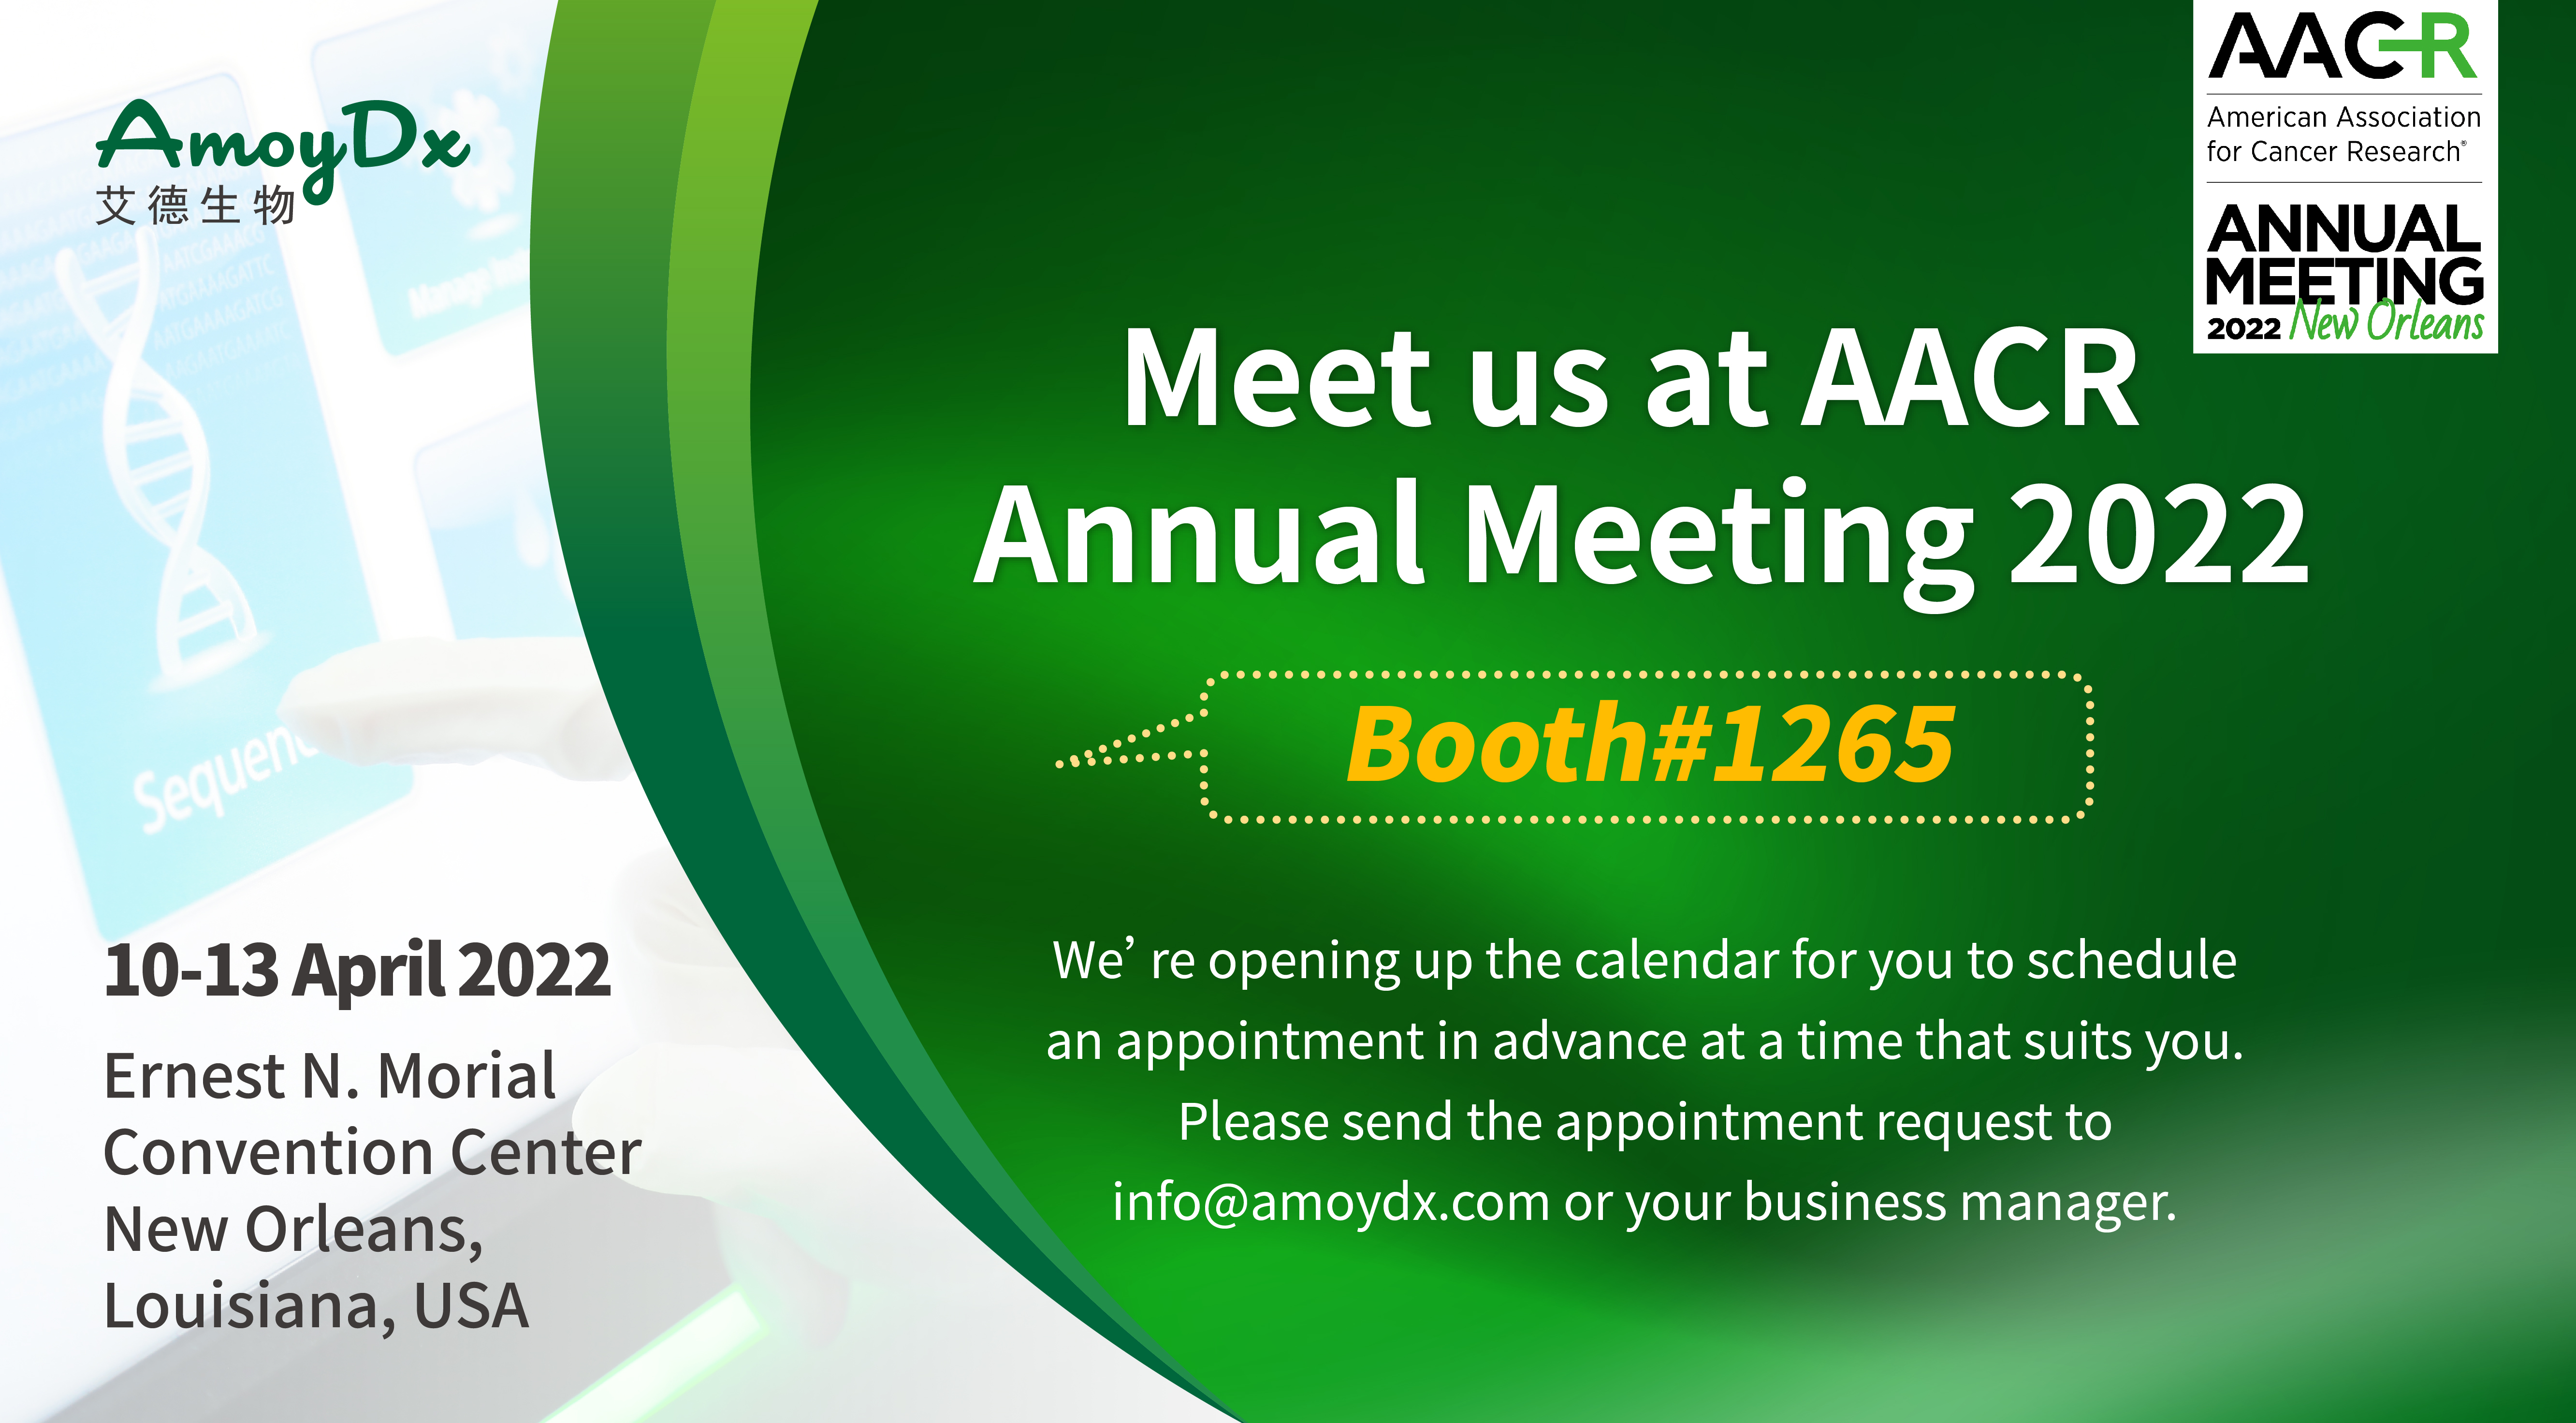 Visit AmoyDx at AACR Annual Meeting 2022 in Louisiana, USA